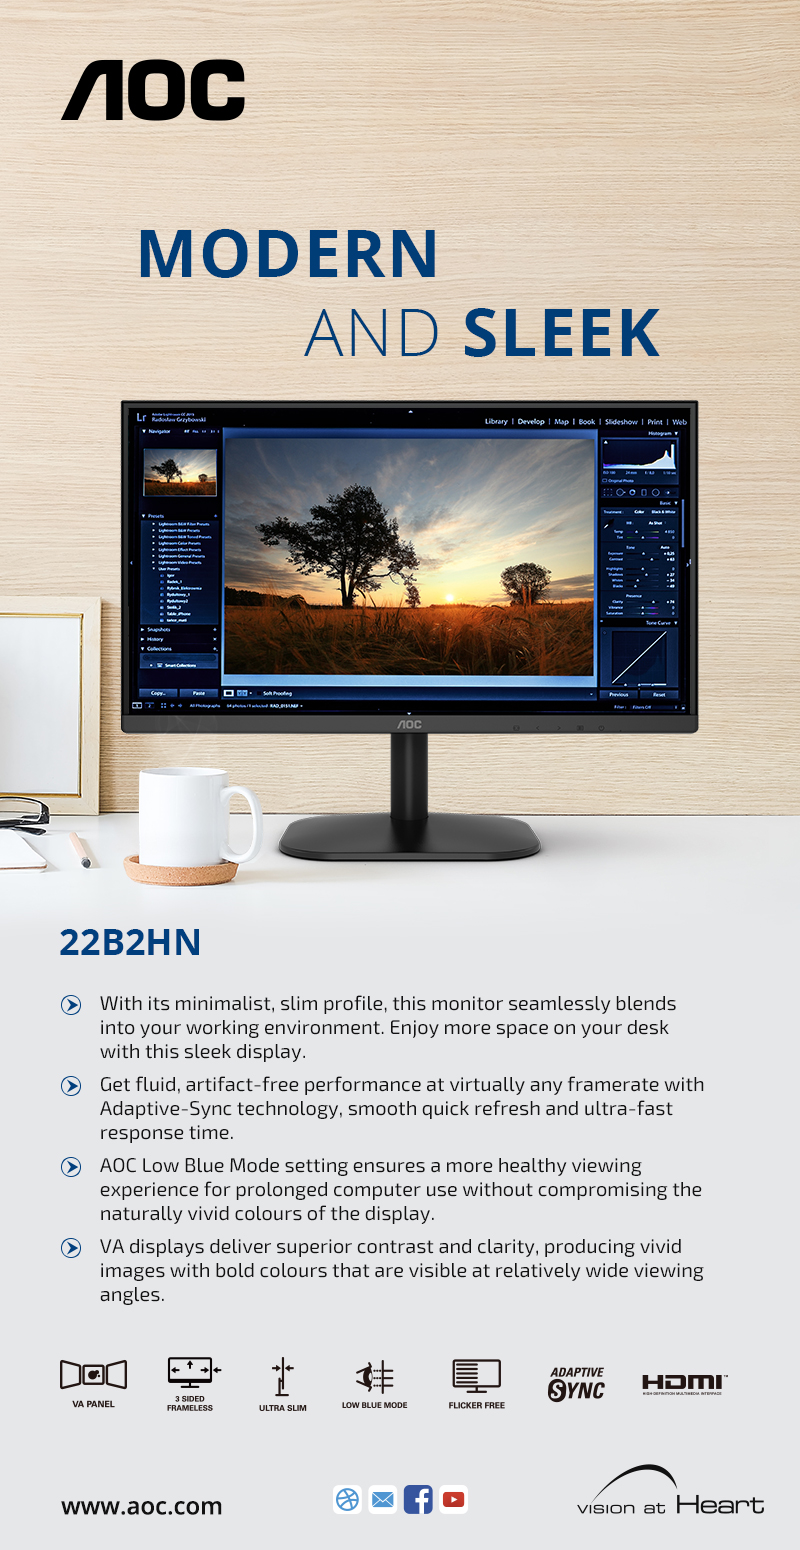 A large marketing image providing additional information about the product AOC 22B2HN 21.5" FHD 75Hz VA Monitor - Additional alt info not provided